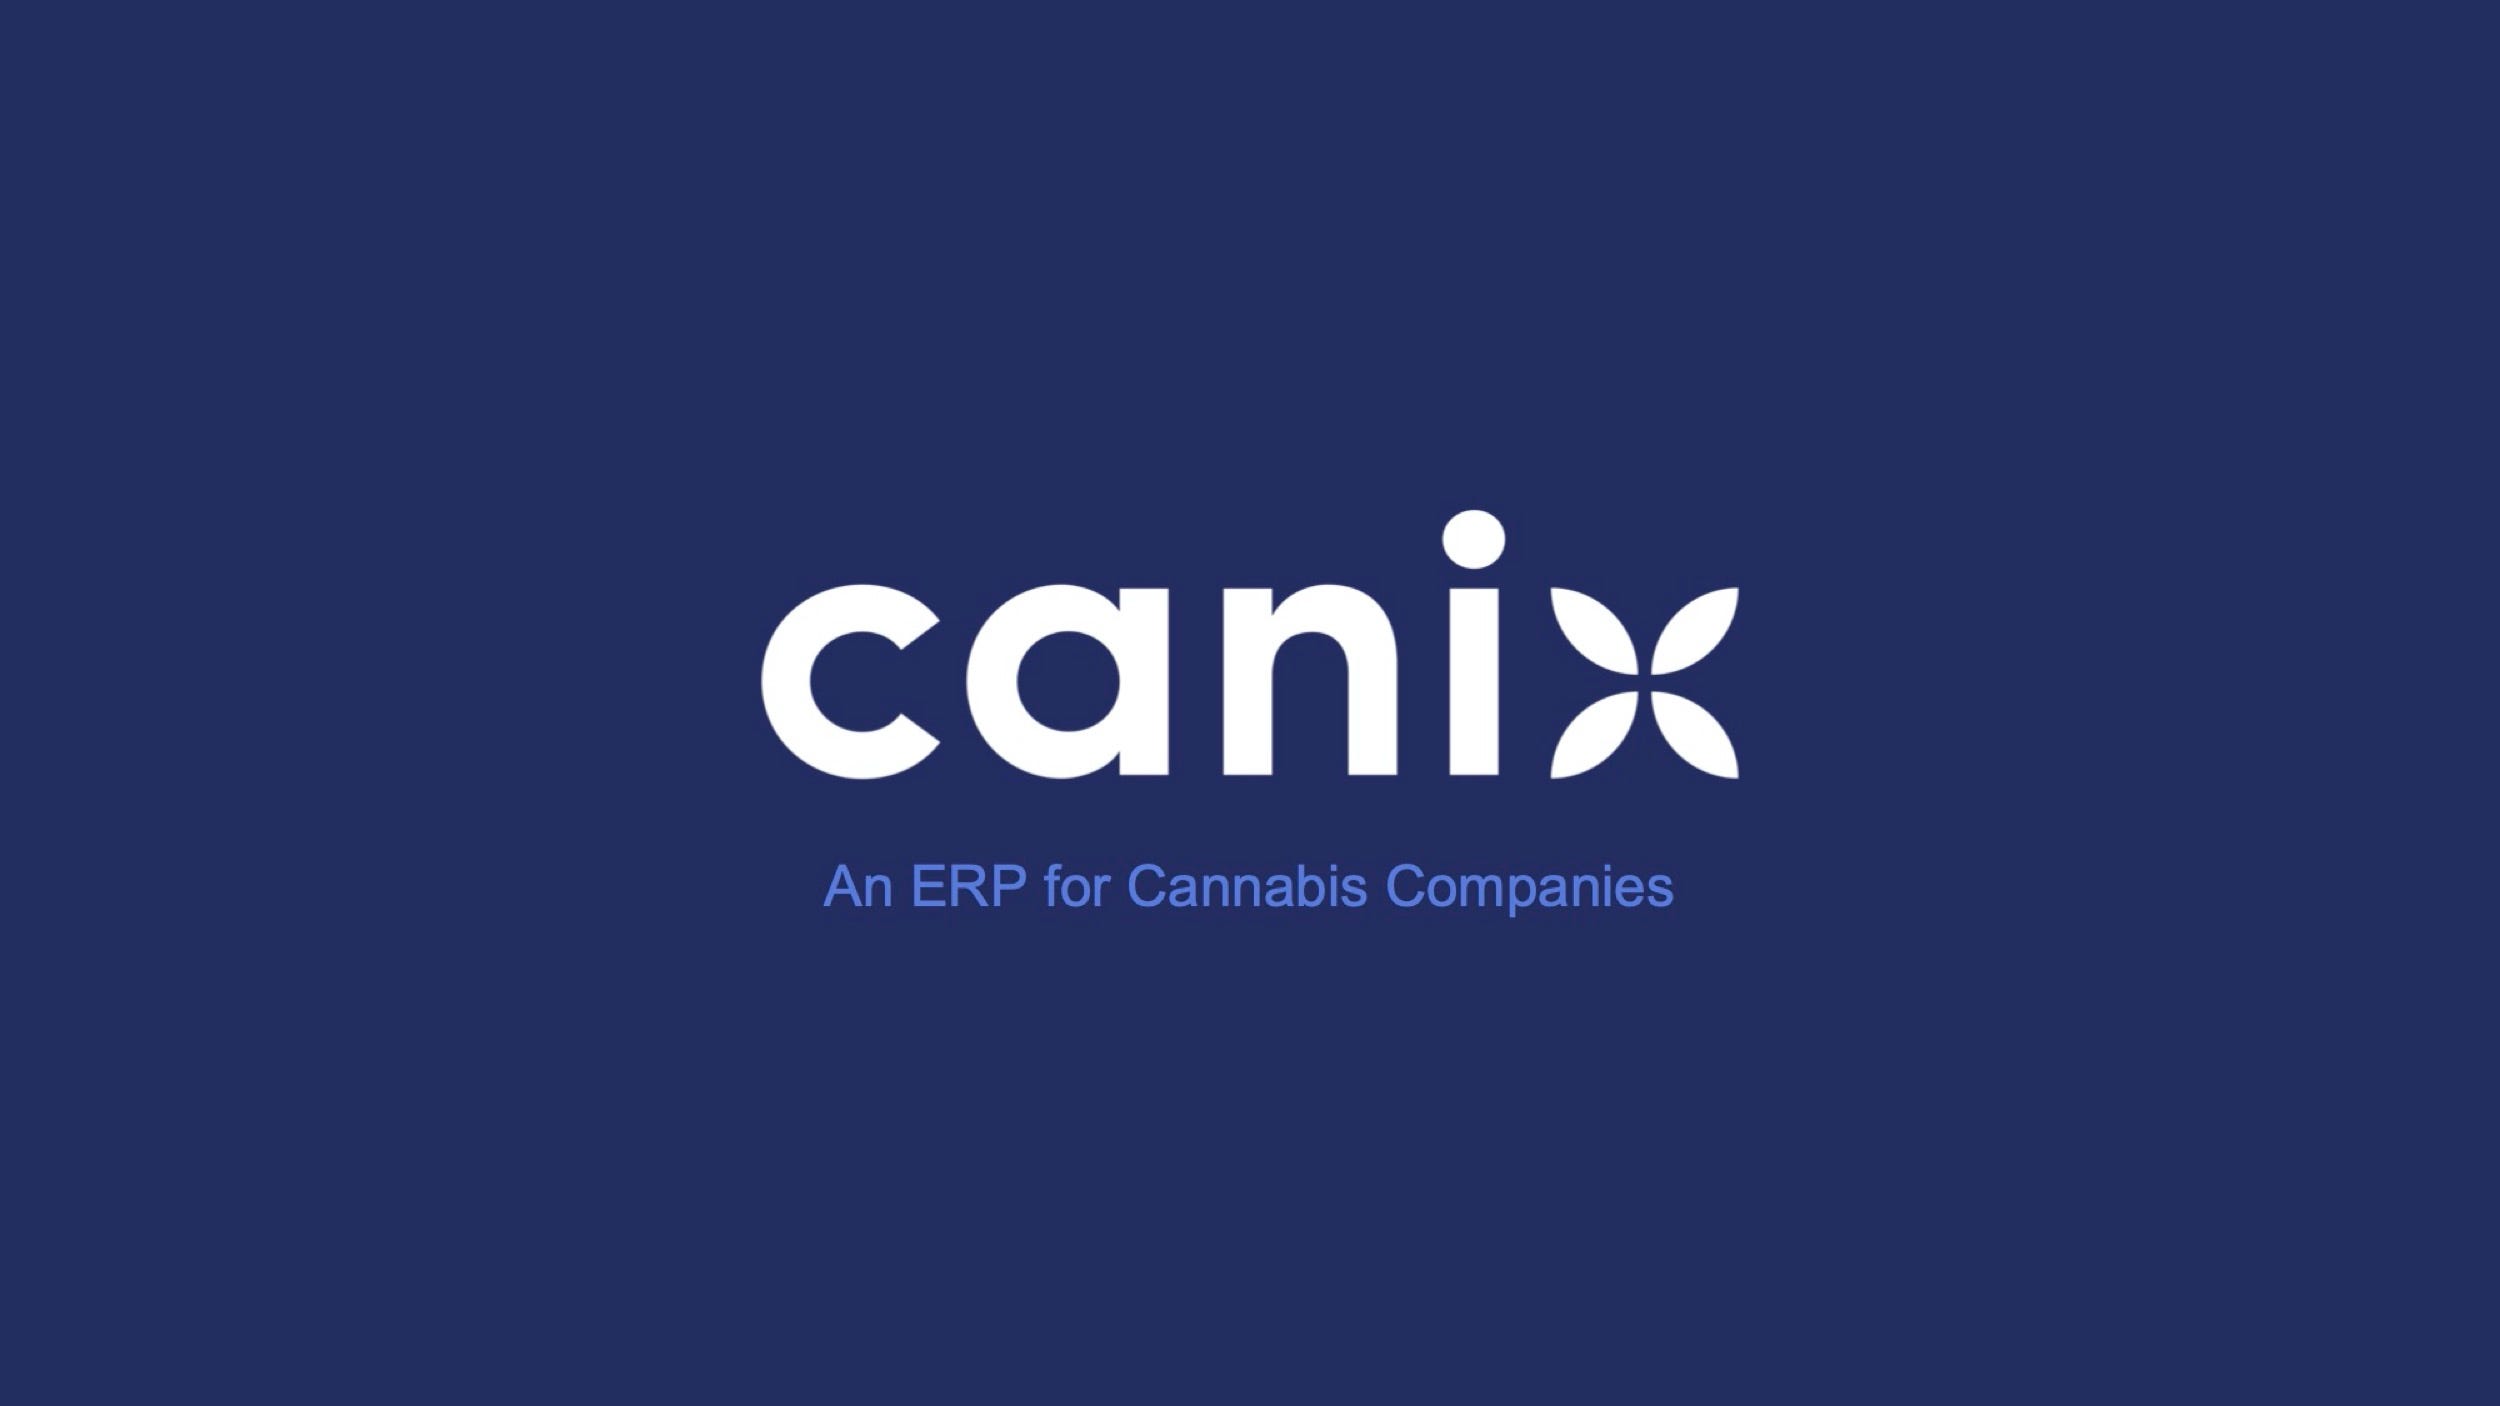 Canix (Cannabis Software) Pitch Deck: Title / Cover Slide — best pitch deck examples - $25M Seed | VIP Graphics